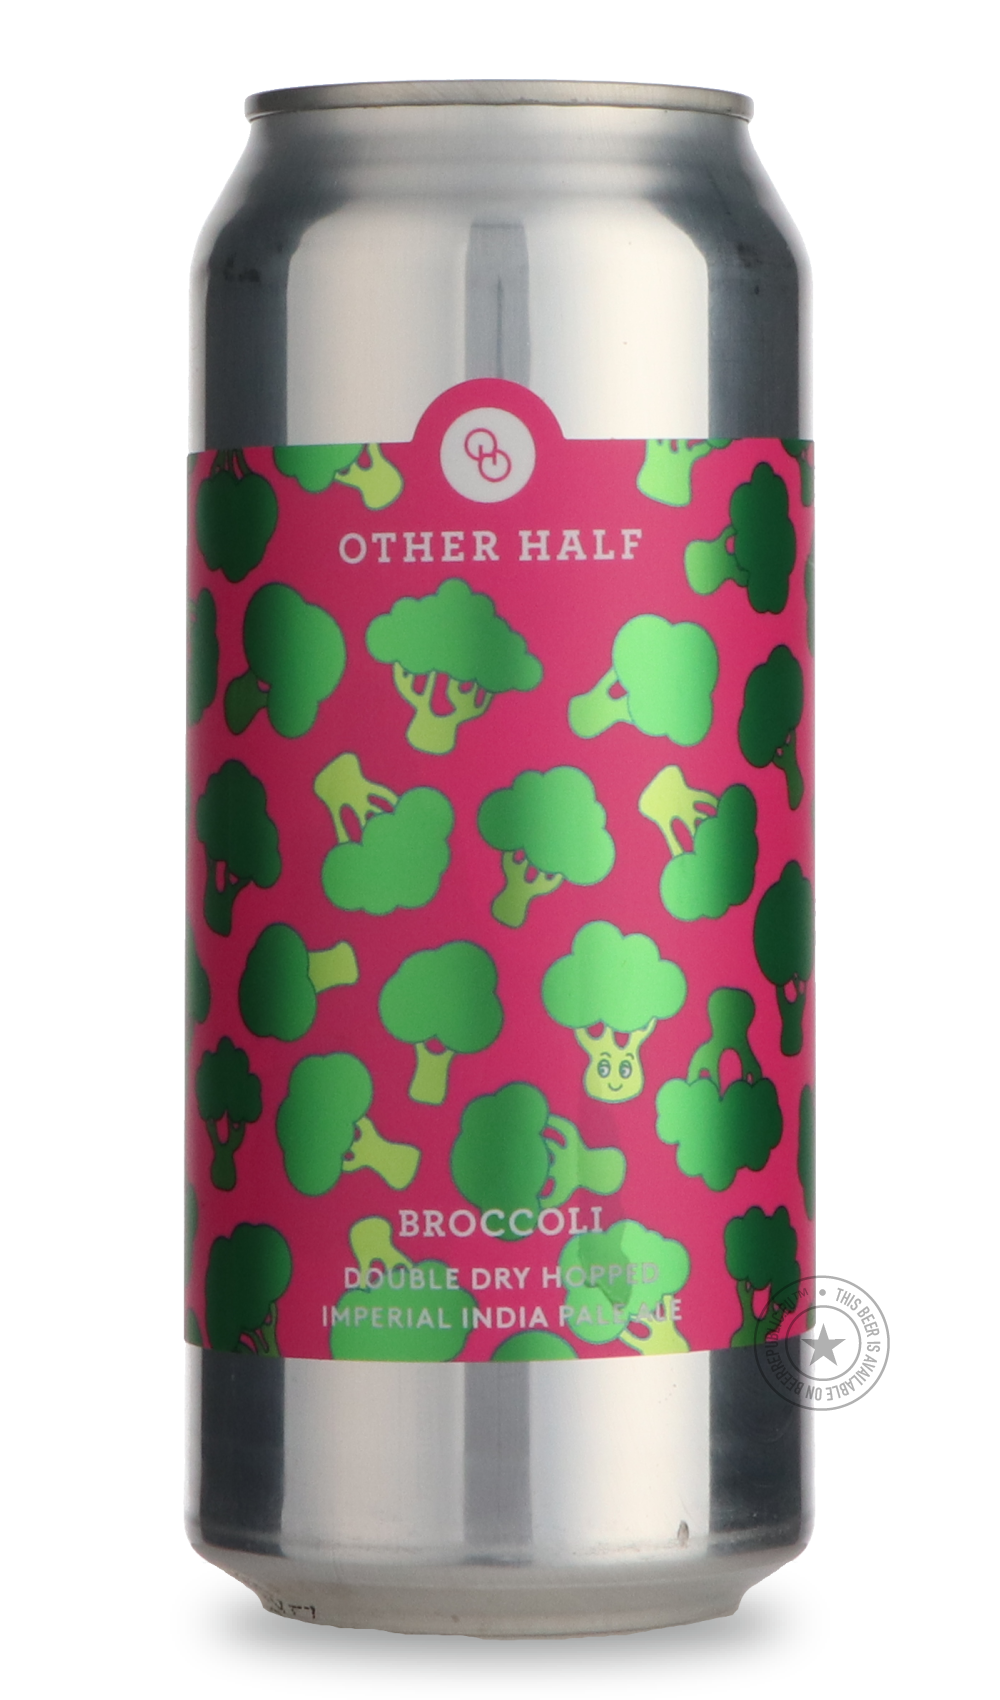 -Other Half- DDH Broccoli-IPA- Only @ Beer Republic - The best online beer store for American & Canadian craft beer - Buy beer online from the USA and Canada - Bier online kopen - Amerikaans bier kopen - Craft beer store - Craft beer kopen - Amerikanisch bier kaufen - Bier online kaufen - Acheter biere online - IPA - Stout - Porter - New England IPA - Hazy IPA - Imperial Stout - Barrel Aged - Barrel Aged Imperial Stout - Brown - Dark beer - Blond - Blonde - Pilsner - Lager - Wheat - Weizen - Amber - Barley 